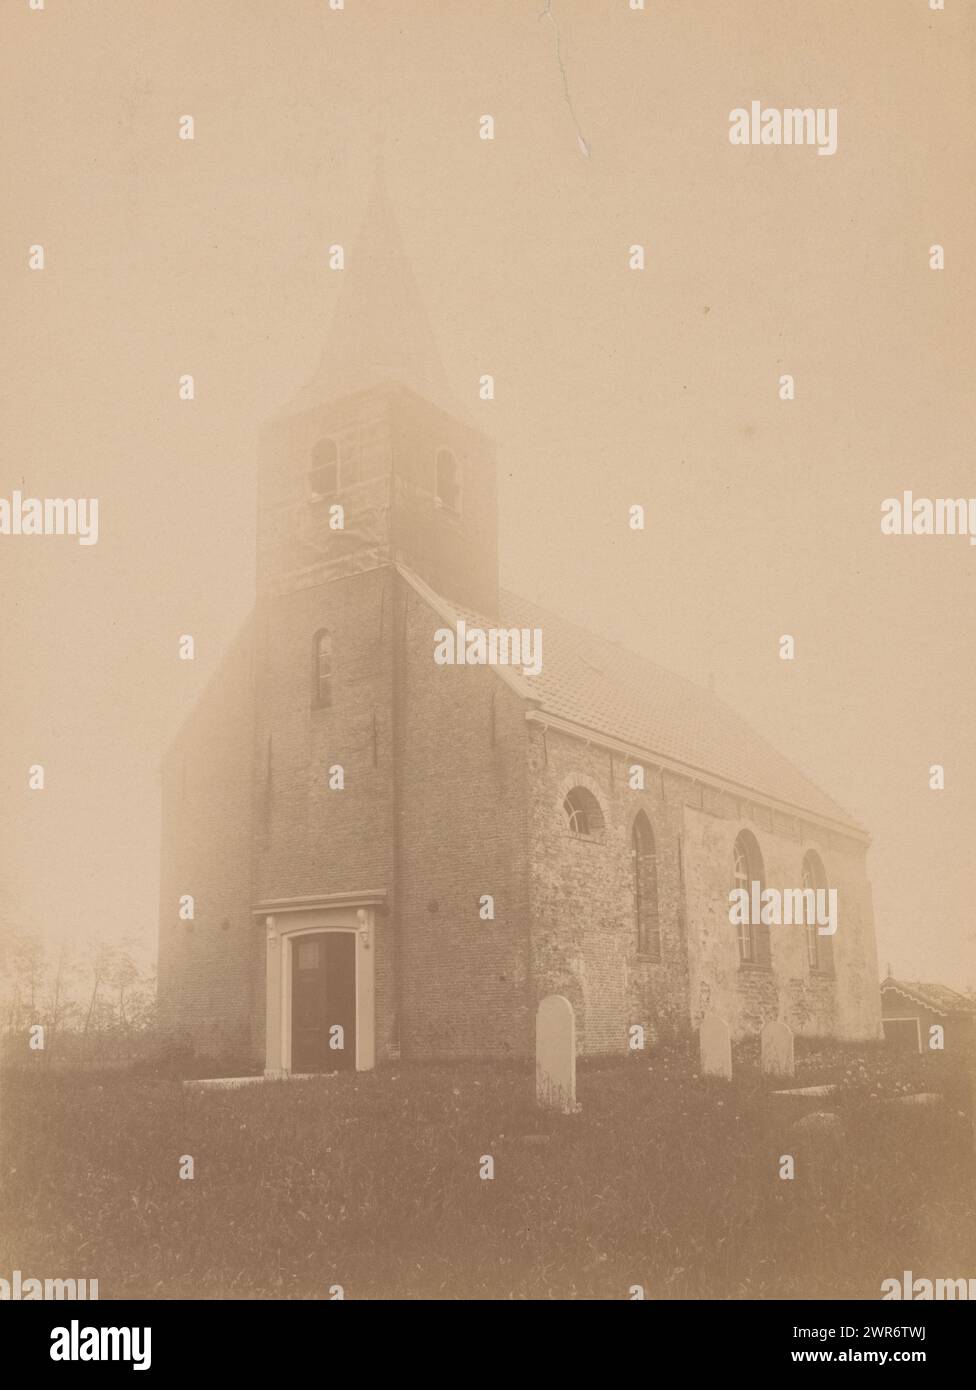 Georgius Church in Suawoude, anoniem (Monumentenzorg), (attributed to), A.J.M. Mulder, (possibly), Suawoude, c. 1880 - c. 1910, photographic support, albumen print, height 230 mm × width 174 mm, photograph Stock Photo